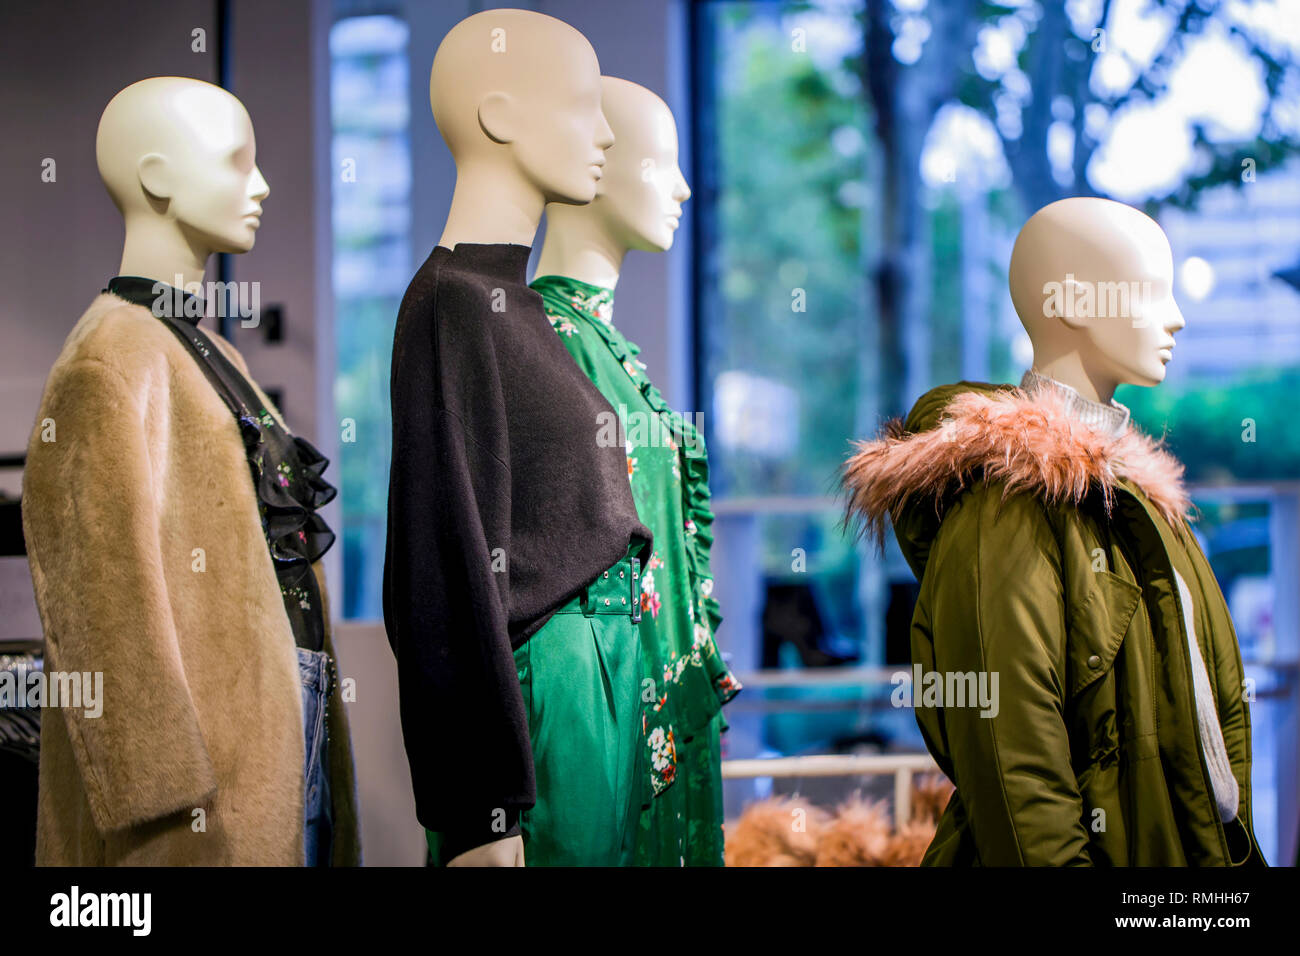 Female mannequins in a fashion store Stock Photo